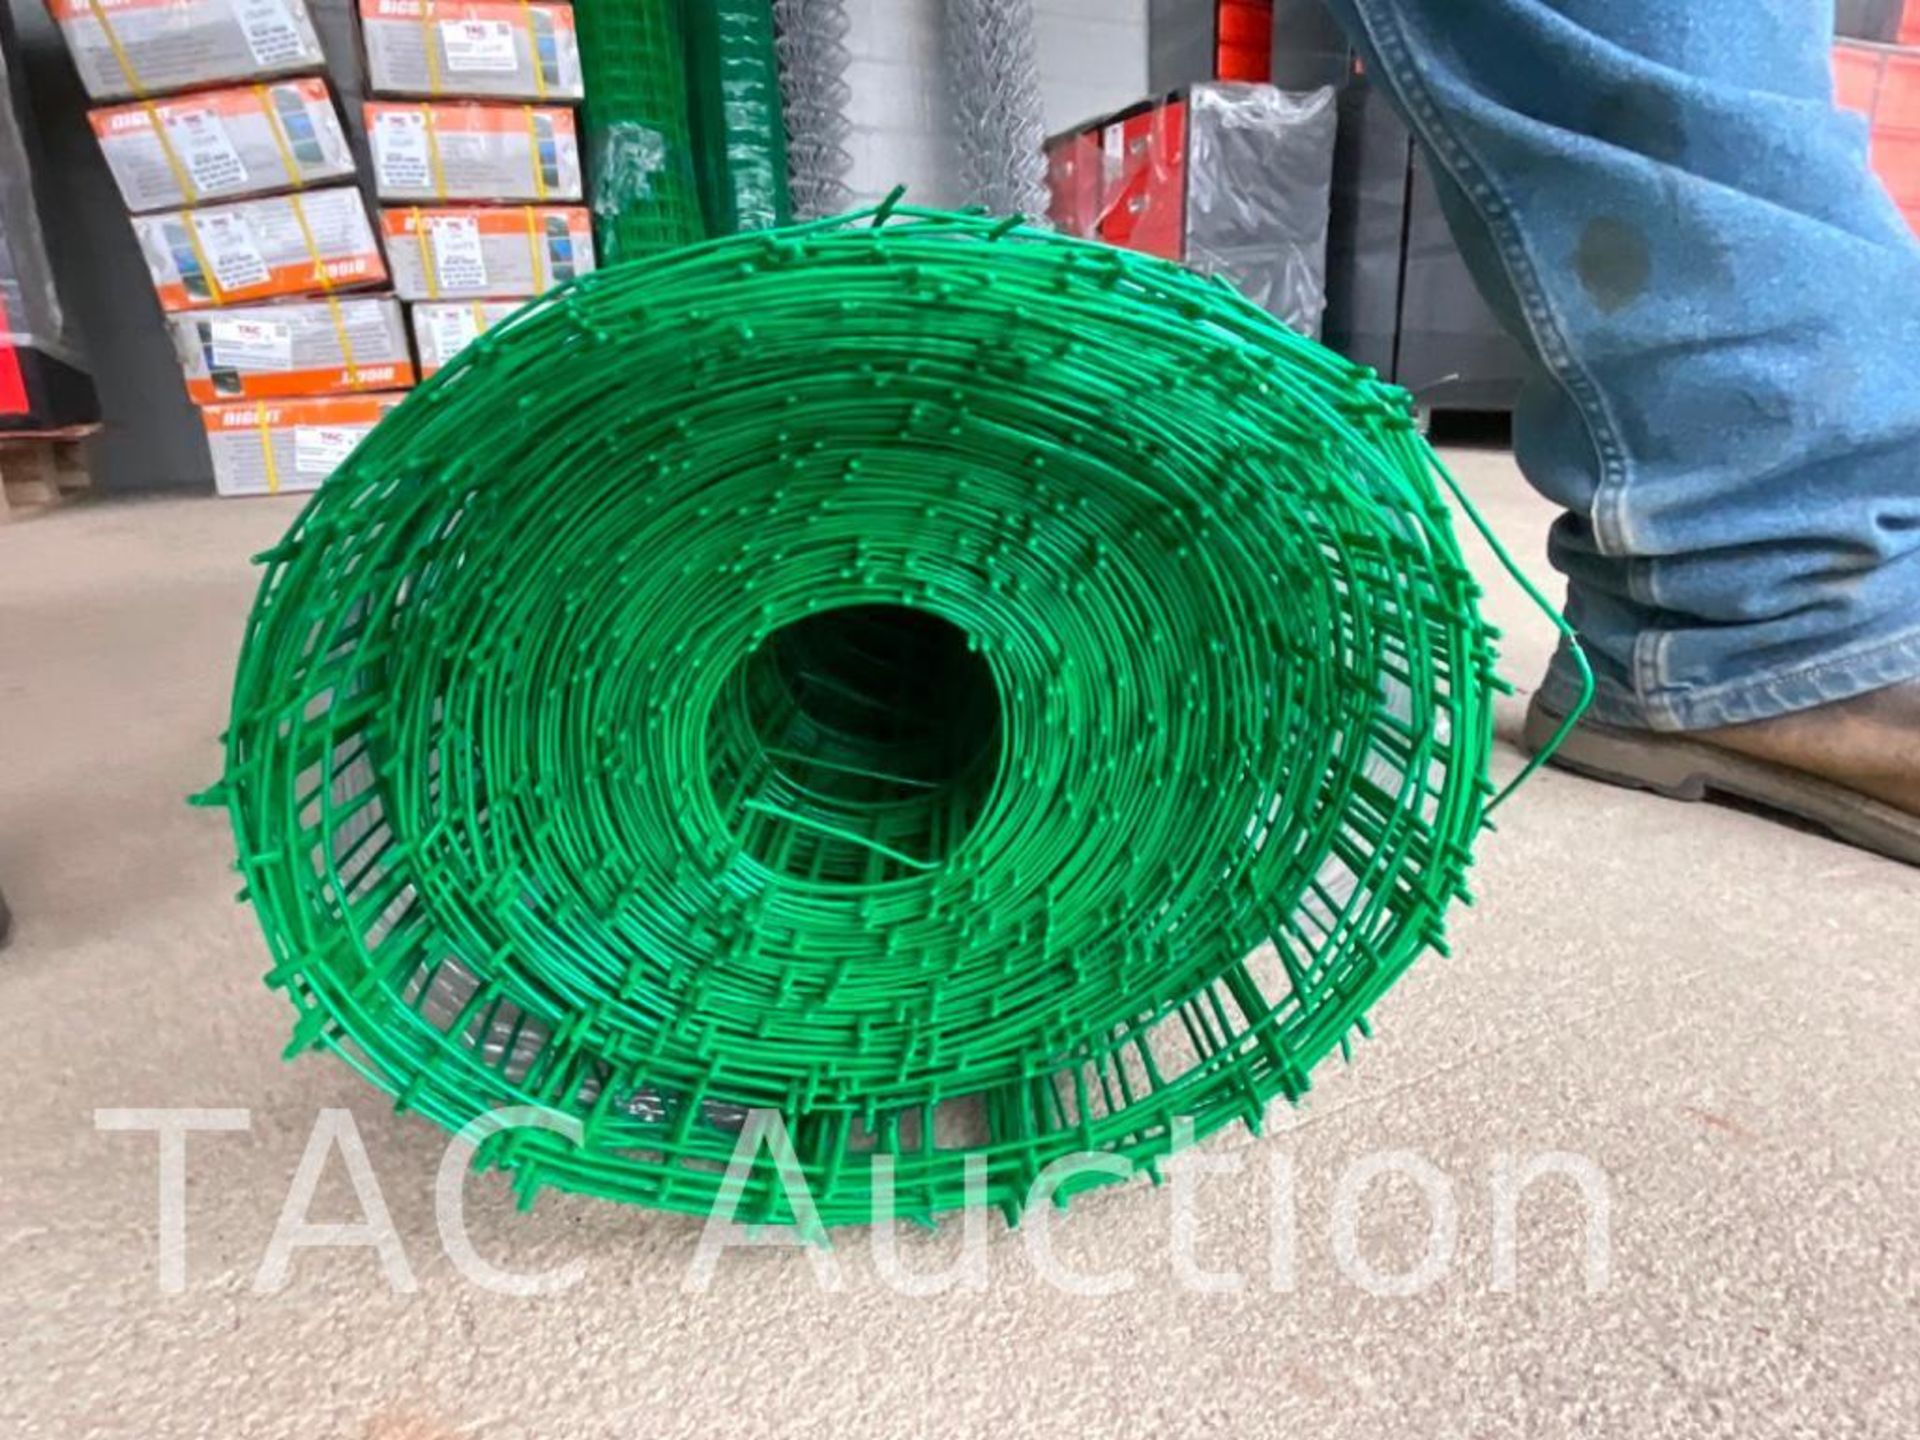 New Green PVC-Coated Euro Mesh Fencing - Image 2 of 3